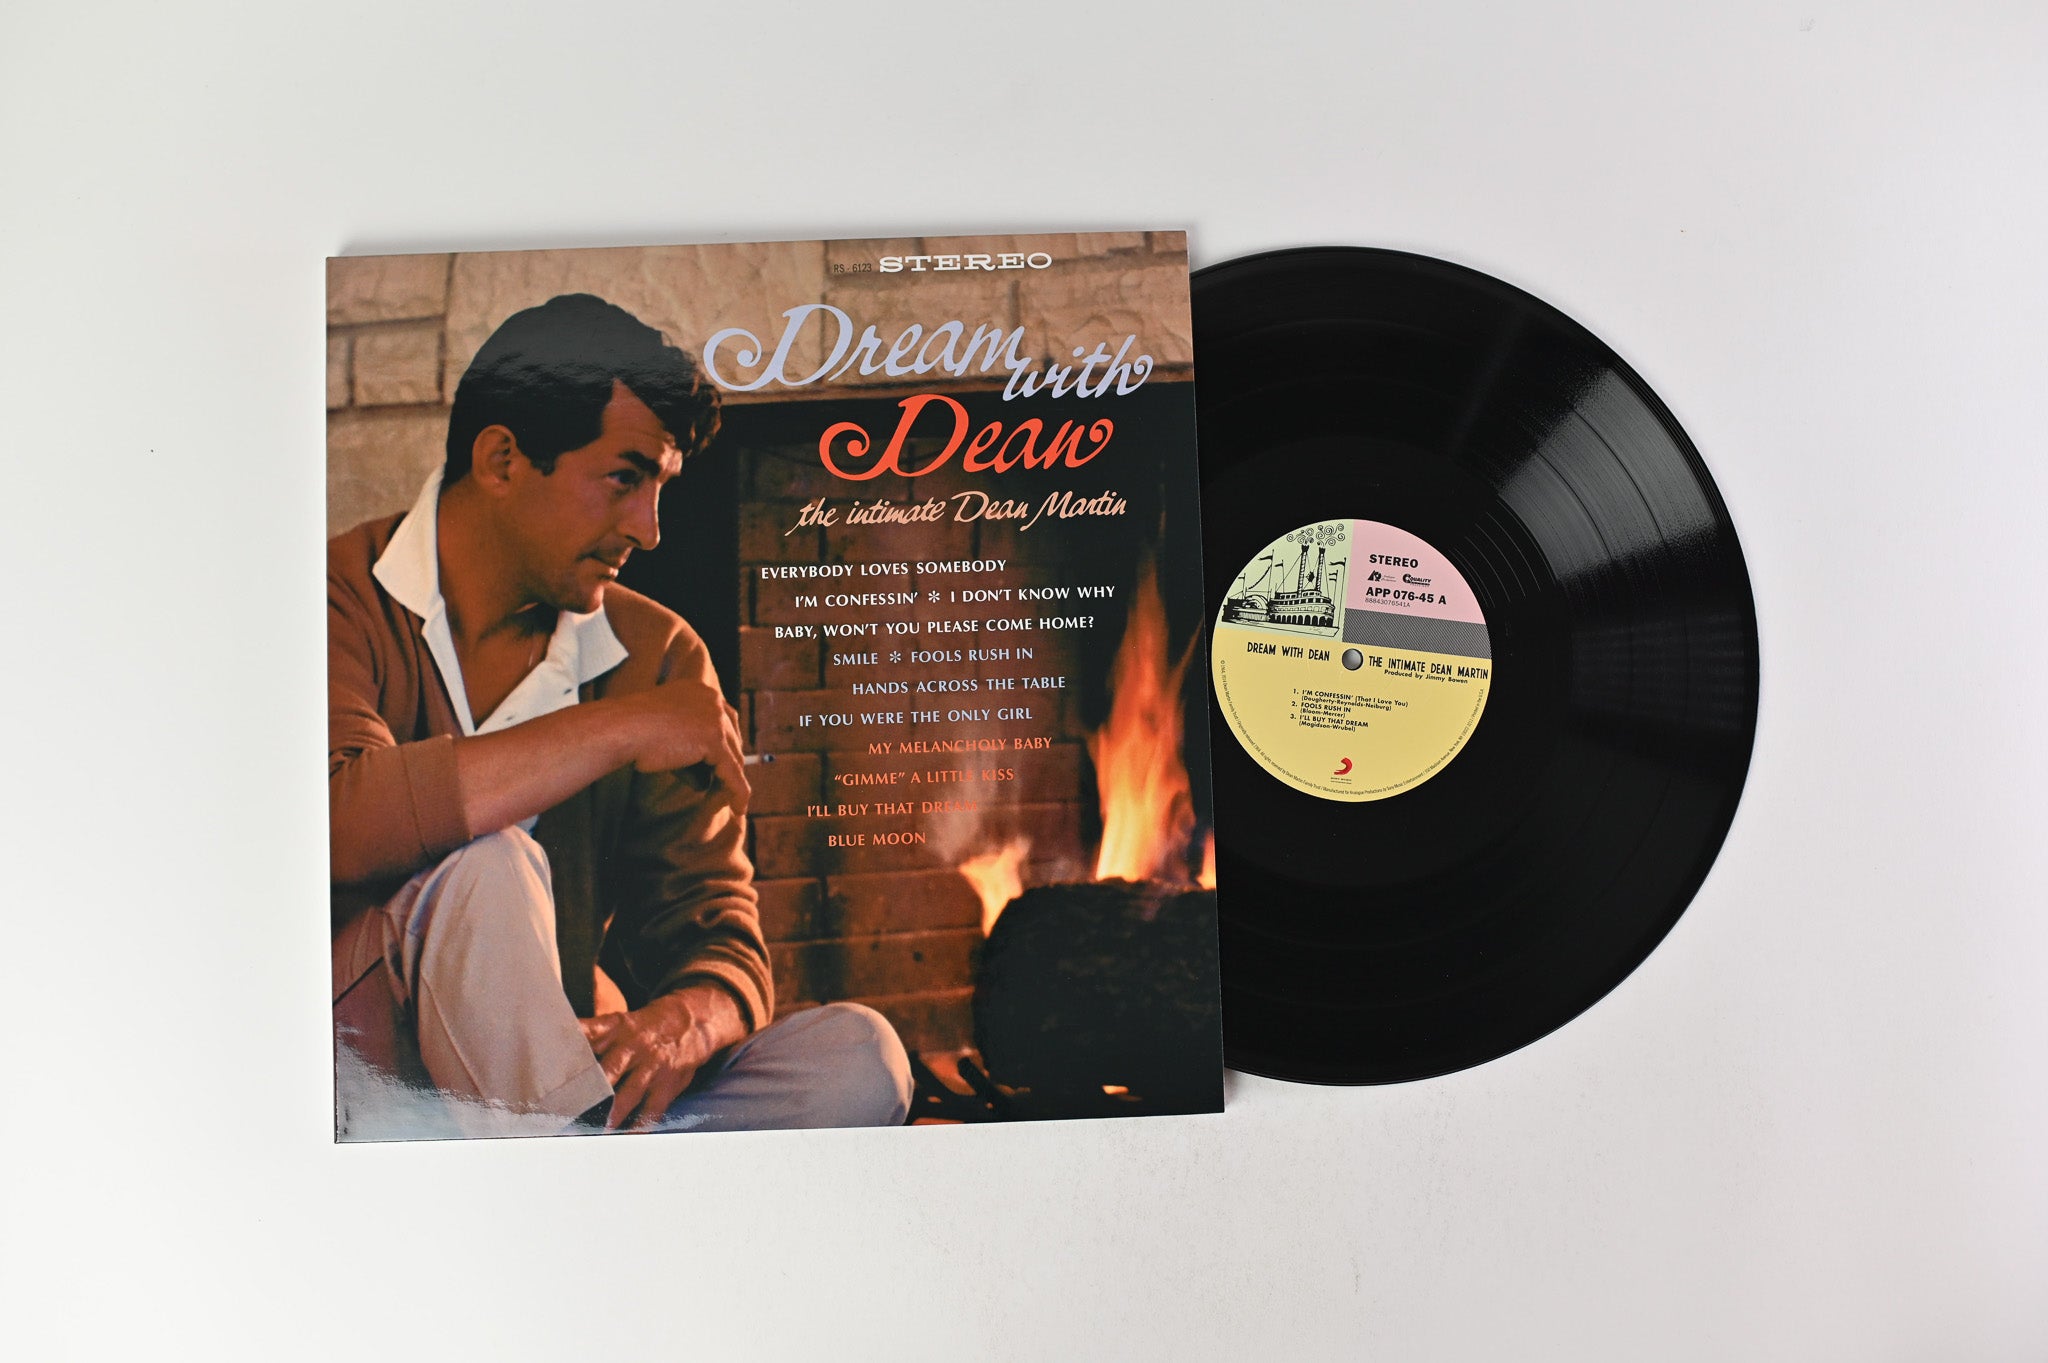 Dean Martin - Dream With Dean - The Intimate Dean Martin on Analogue Productions